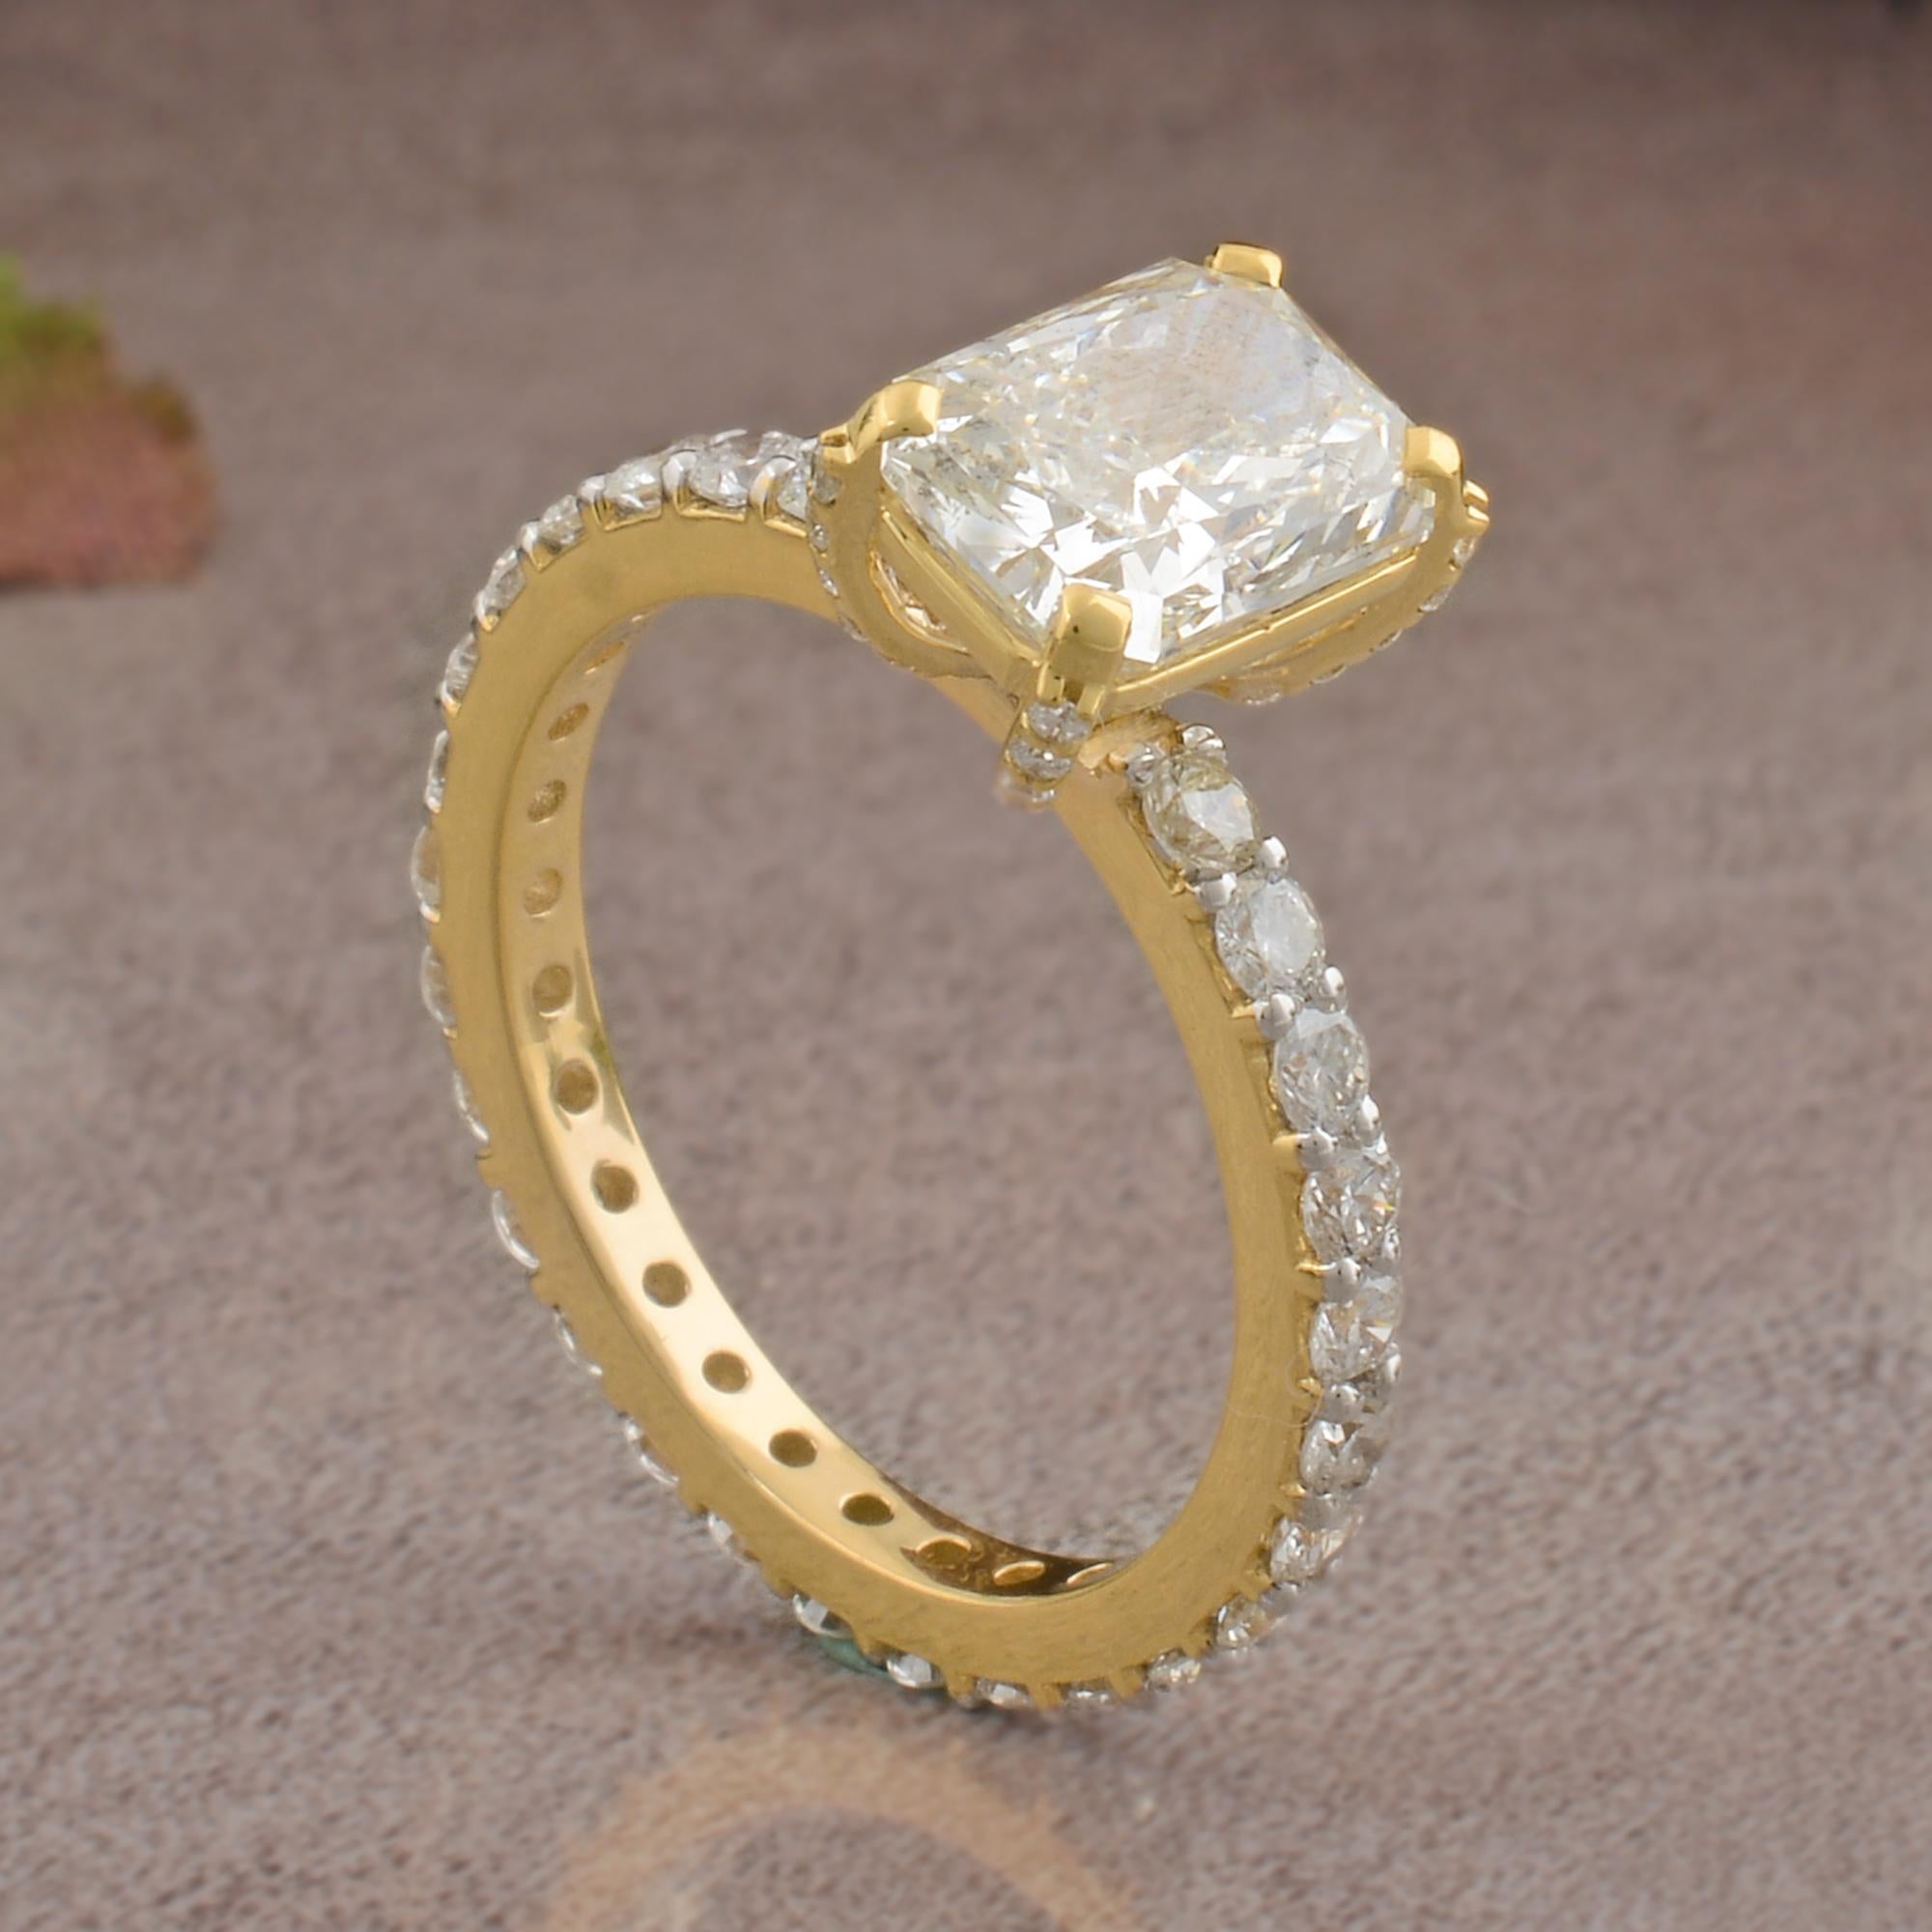 For Sale:  SI Clarity HI Color Solitaire Diamond Band Ring 18 Karat Yellow Gold Jewelry 3